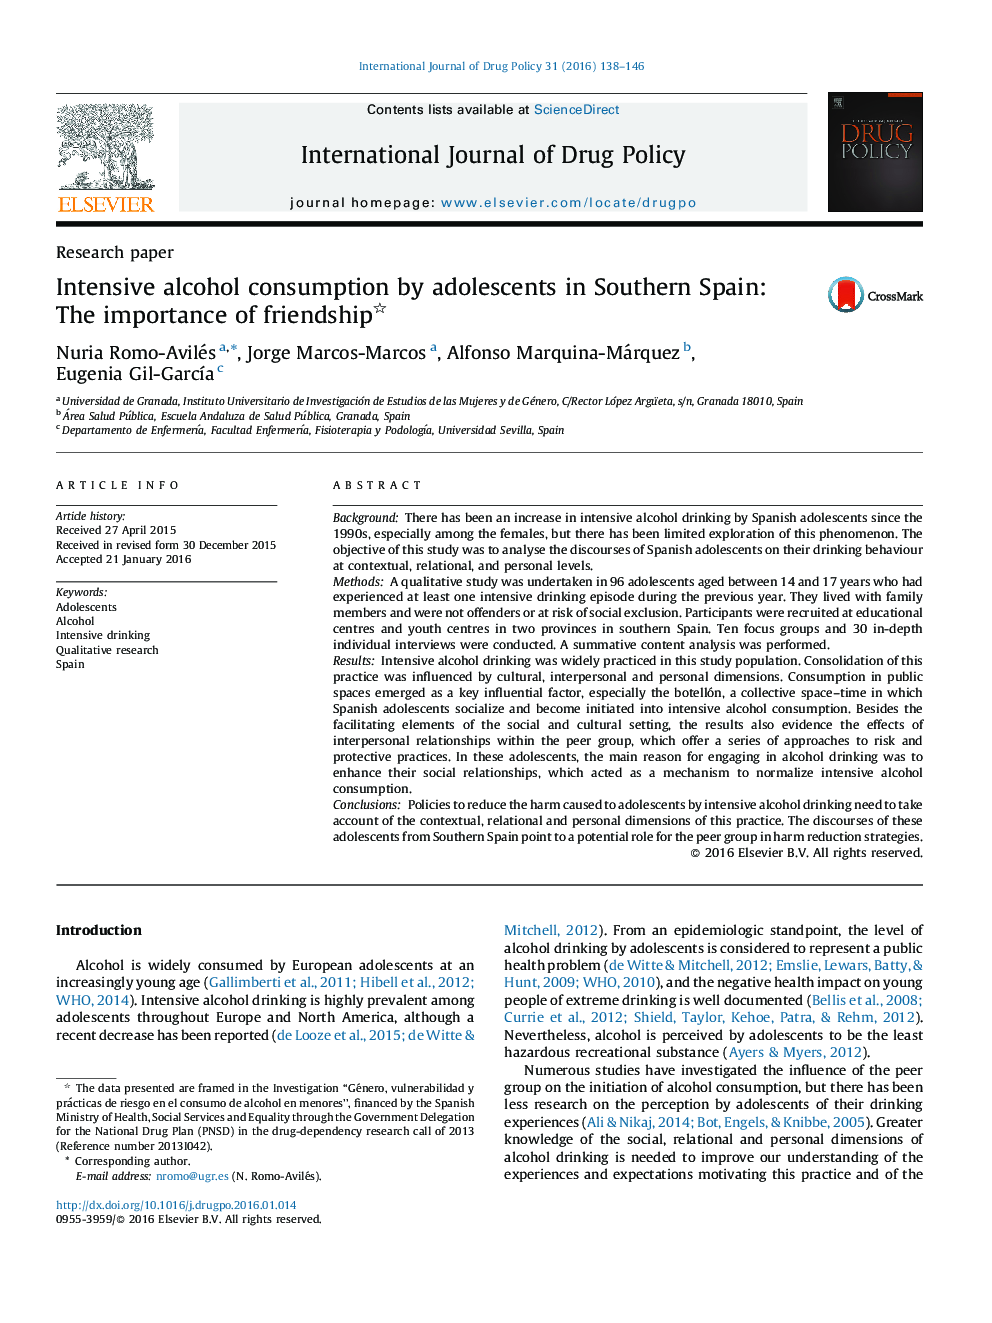 Intensive alcohol consumption by adolescents in Southern Spain: The importance of friendship 